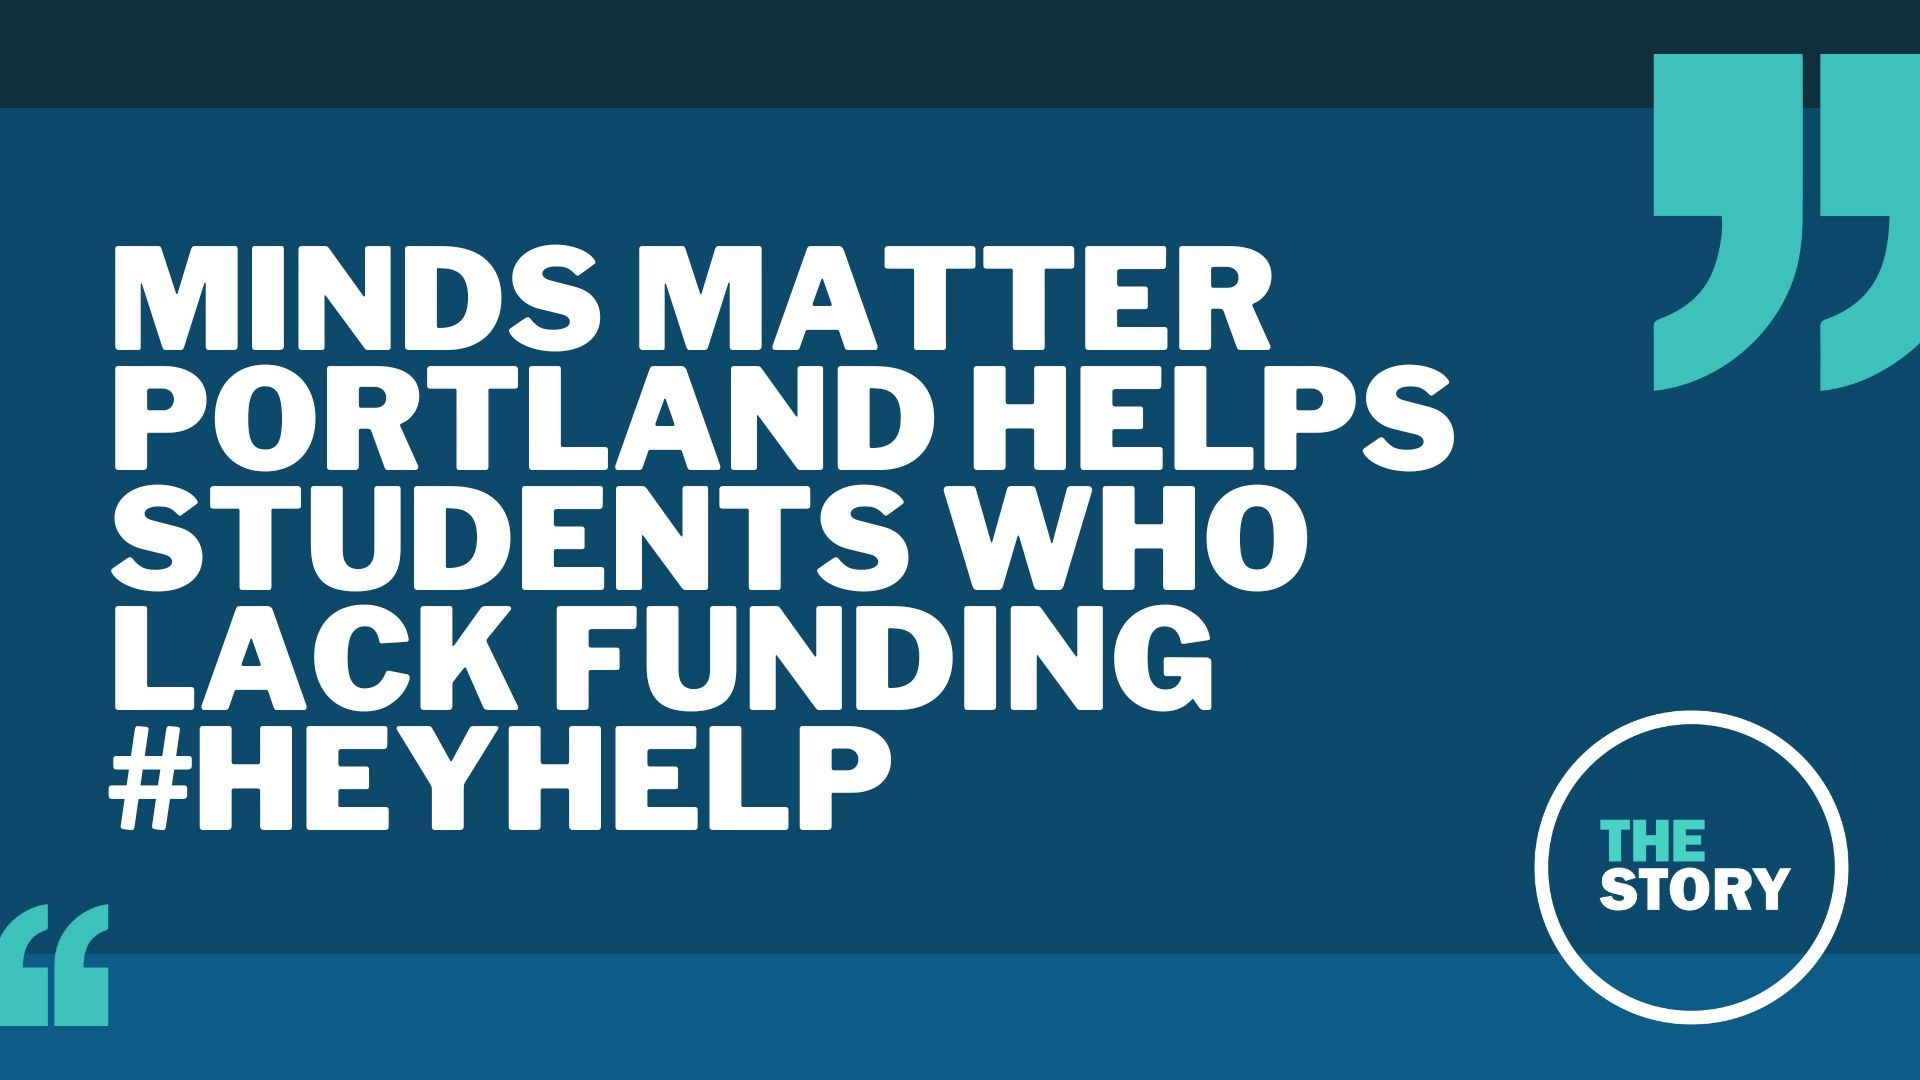 Minds Matter Portland works with small groups of highly motivated students who have the desire to attend four-year schools but lack the funding.